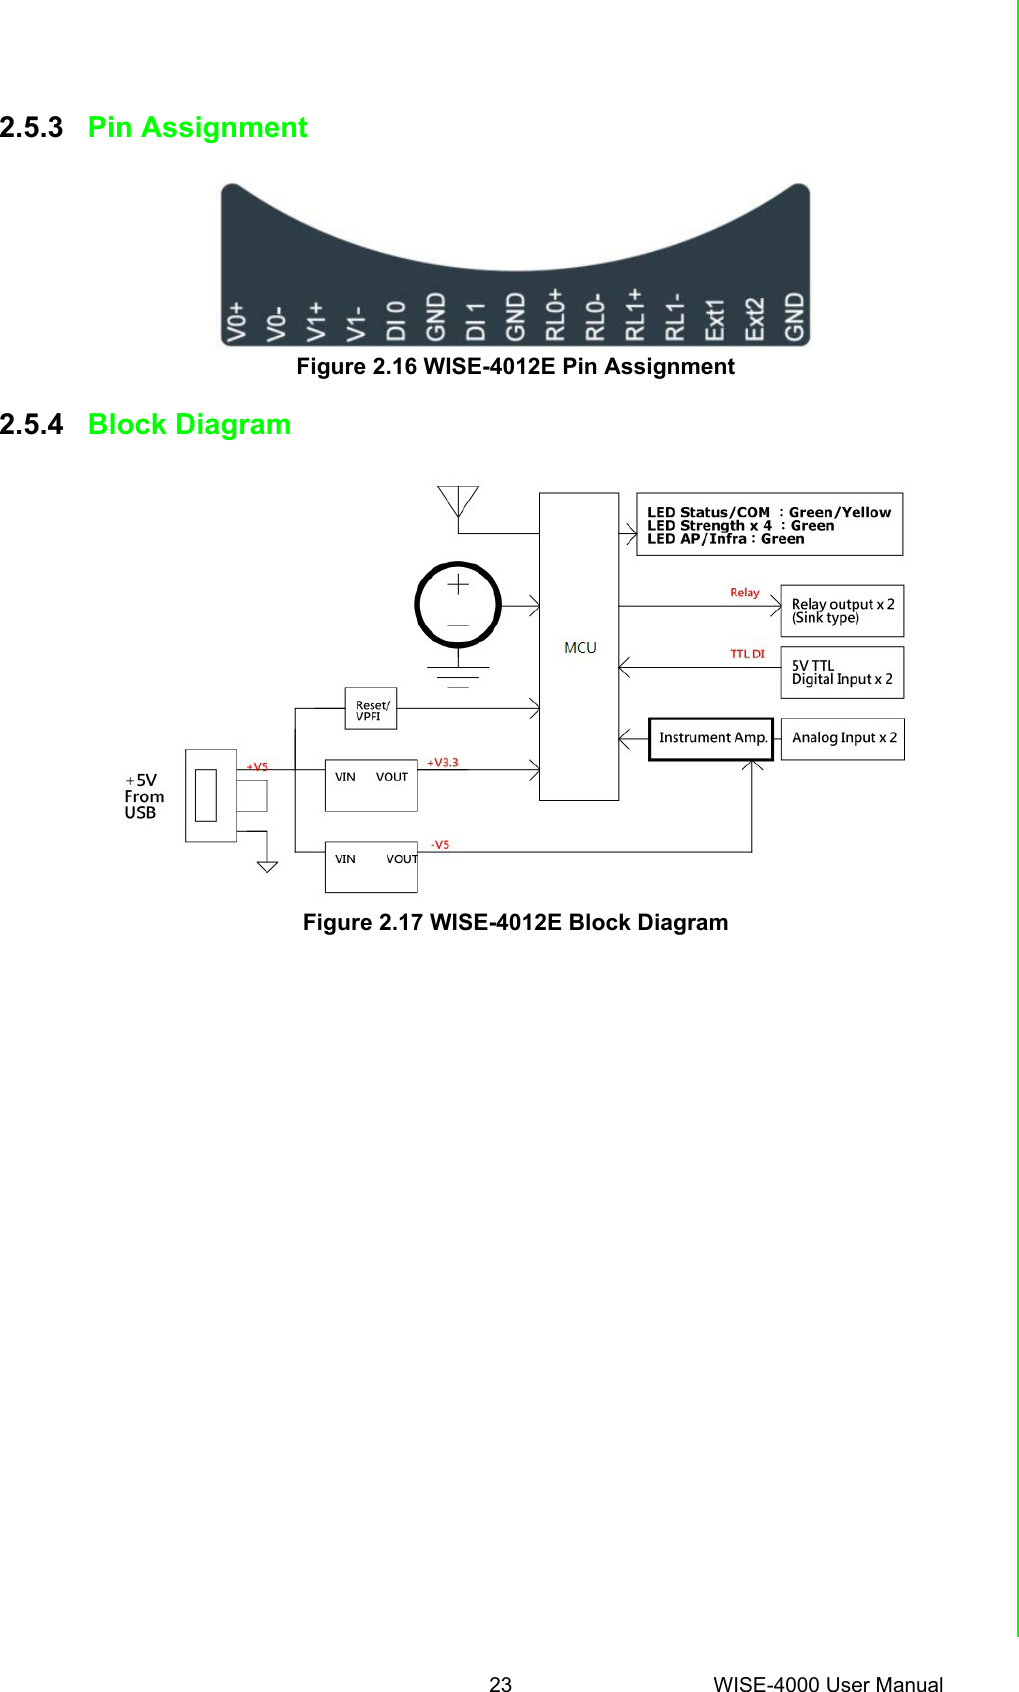 23 WISE-4000 User ManualChapter 2 Product Specifications2.5.3 Pin AssignmentFigure 2.16 WISE-4012E Pin Assignment2.5.4 Block DiagramFigure 2.17 WISE-4012E Block Diagram